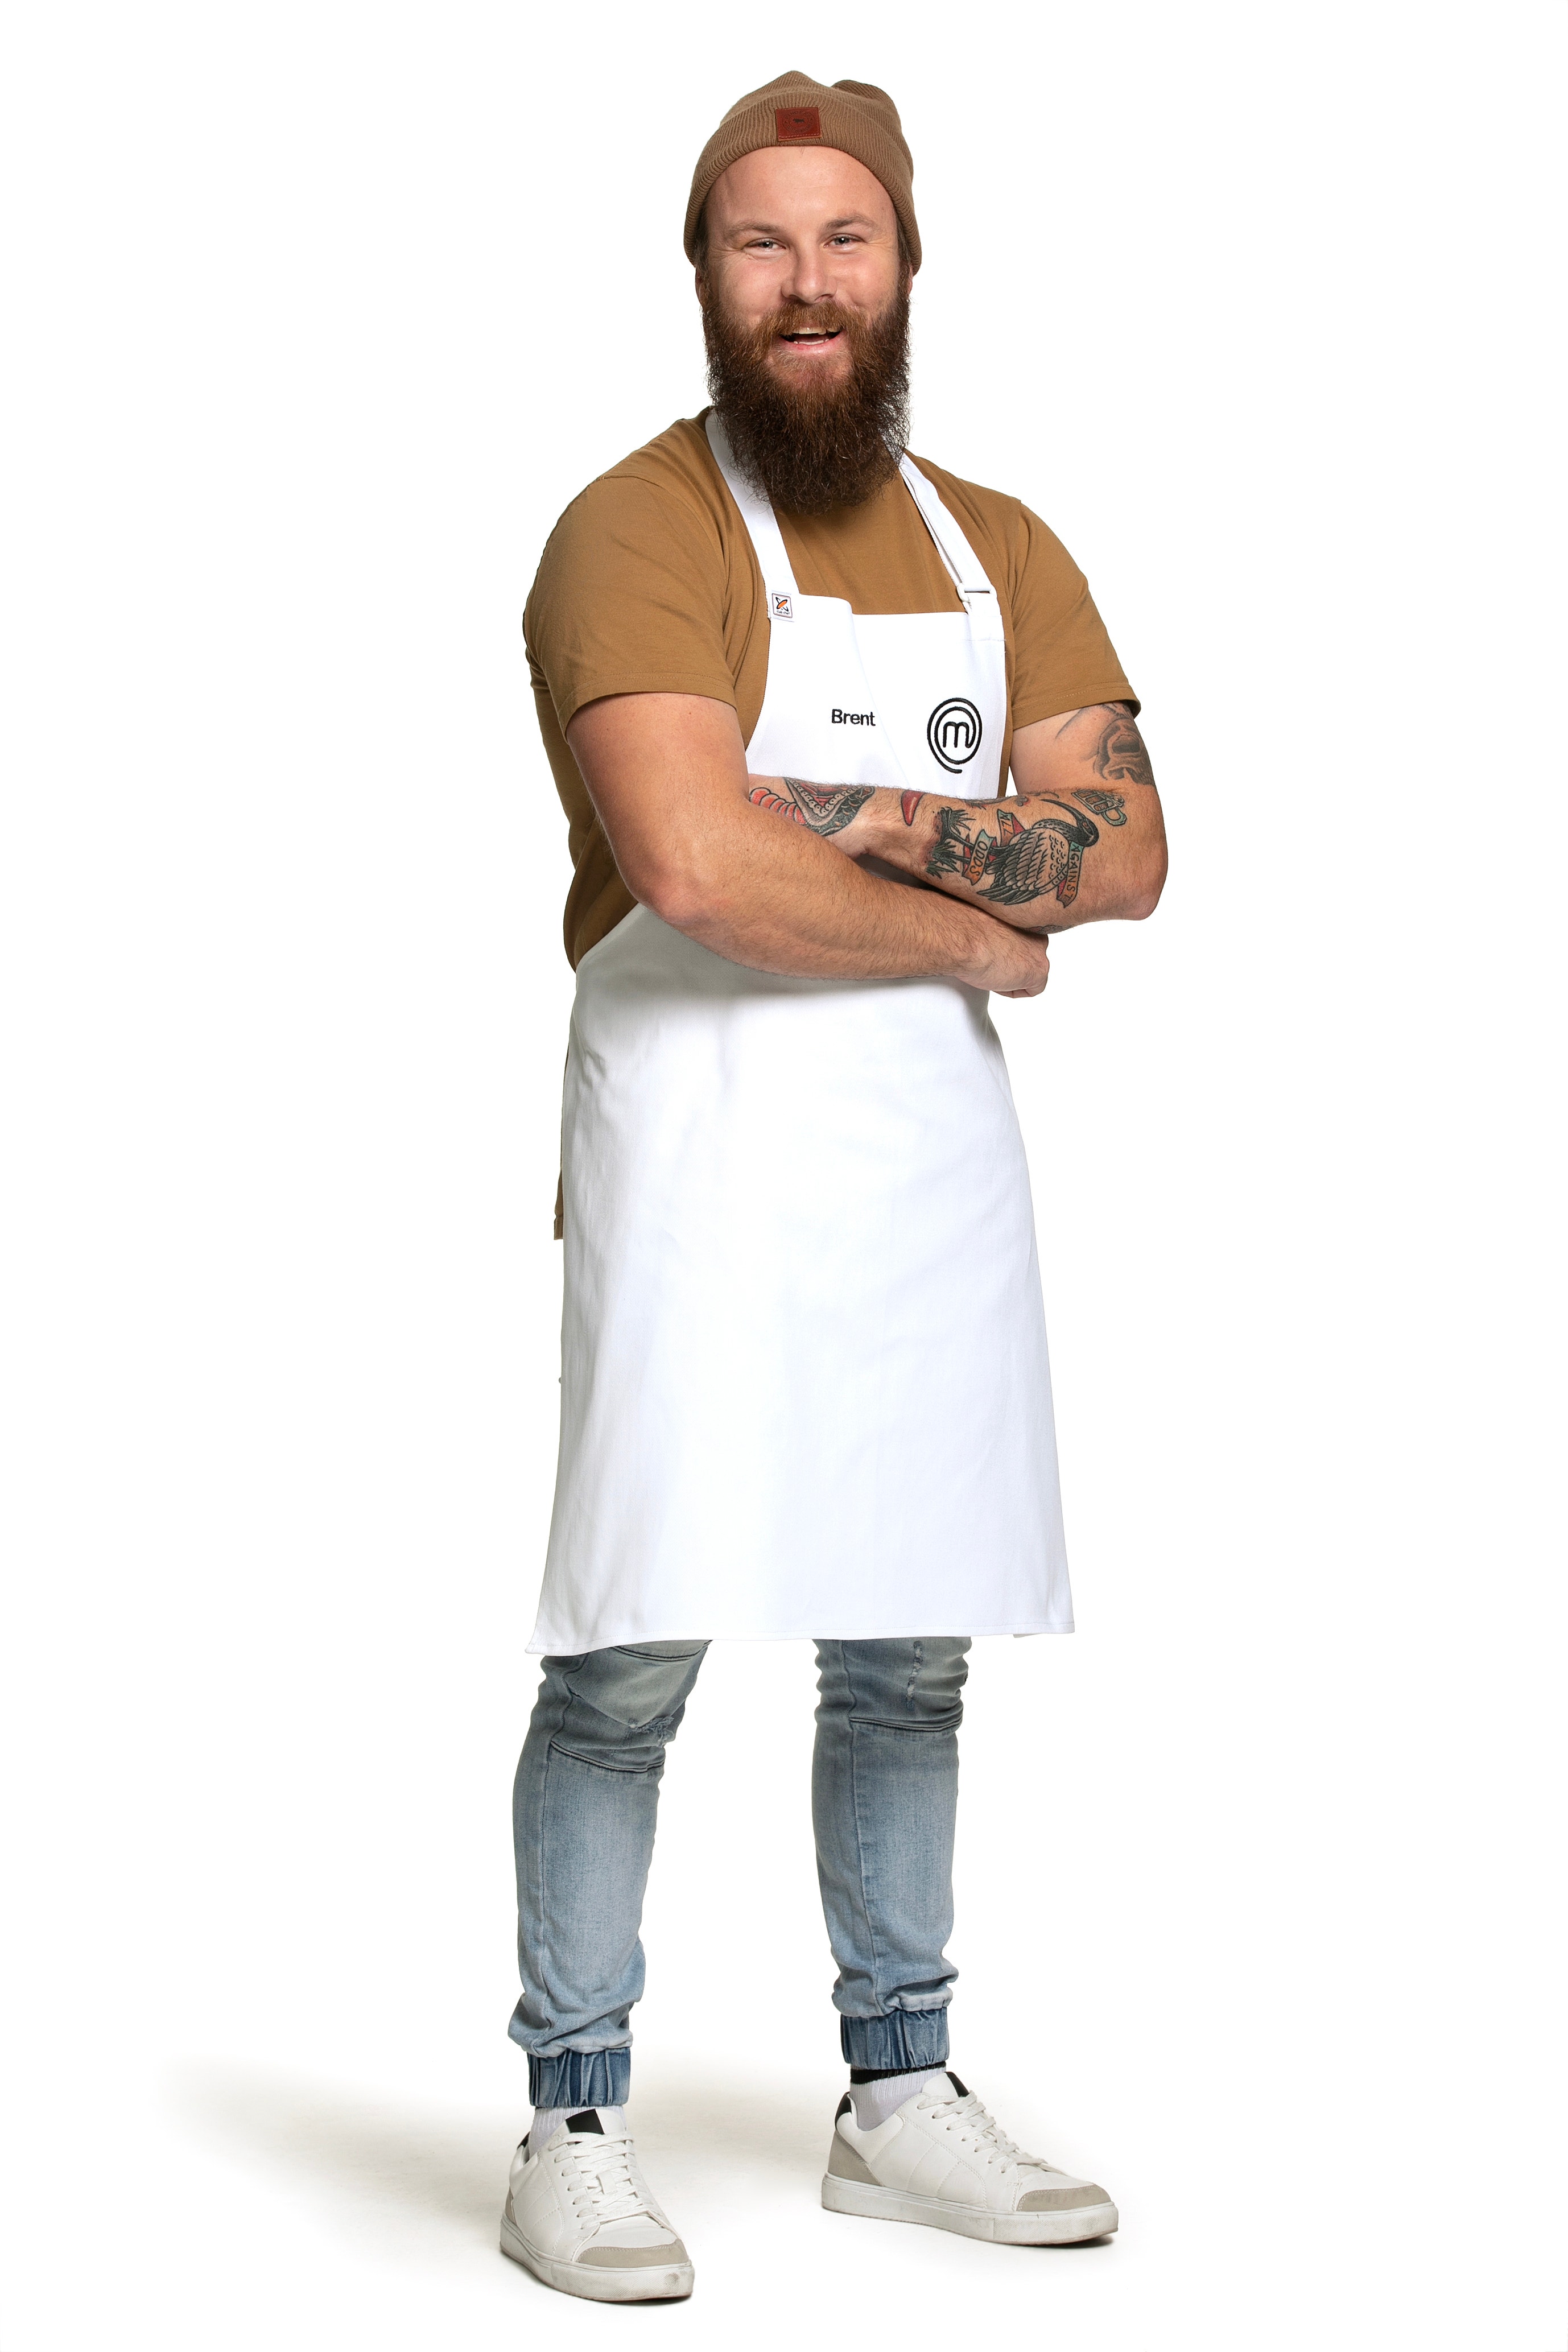 I know I'm getting ahead of myself, but if they do back to win again in the  future. These would be my choices : r/Masterchef